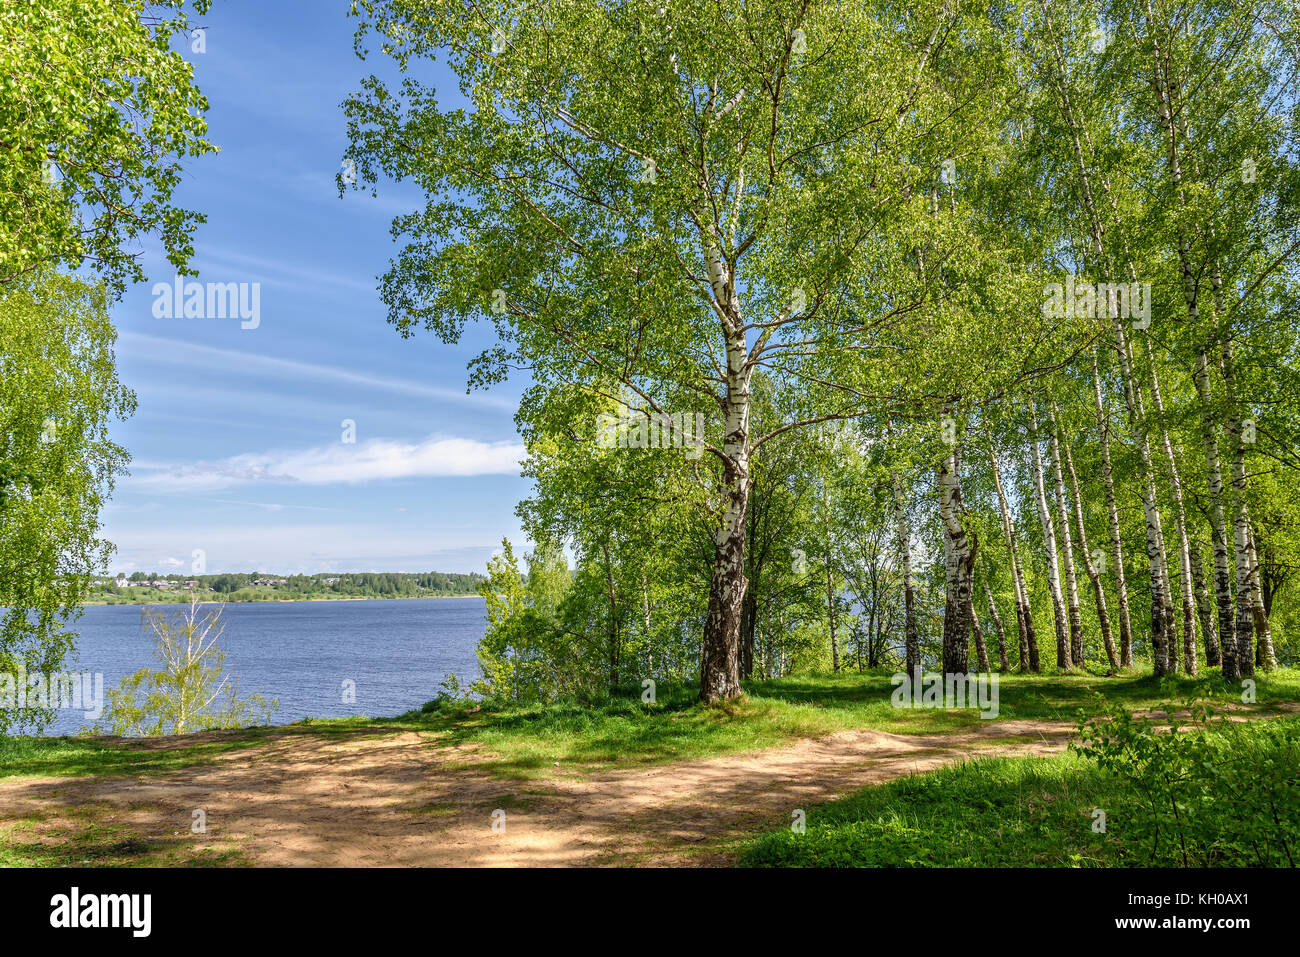 Beautiful landscape with a long thin birch trees with green leaves in a birch grove on the banks of the river and the path to the river Stock Photo